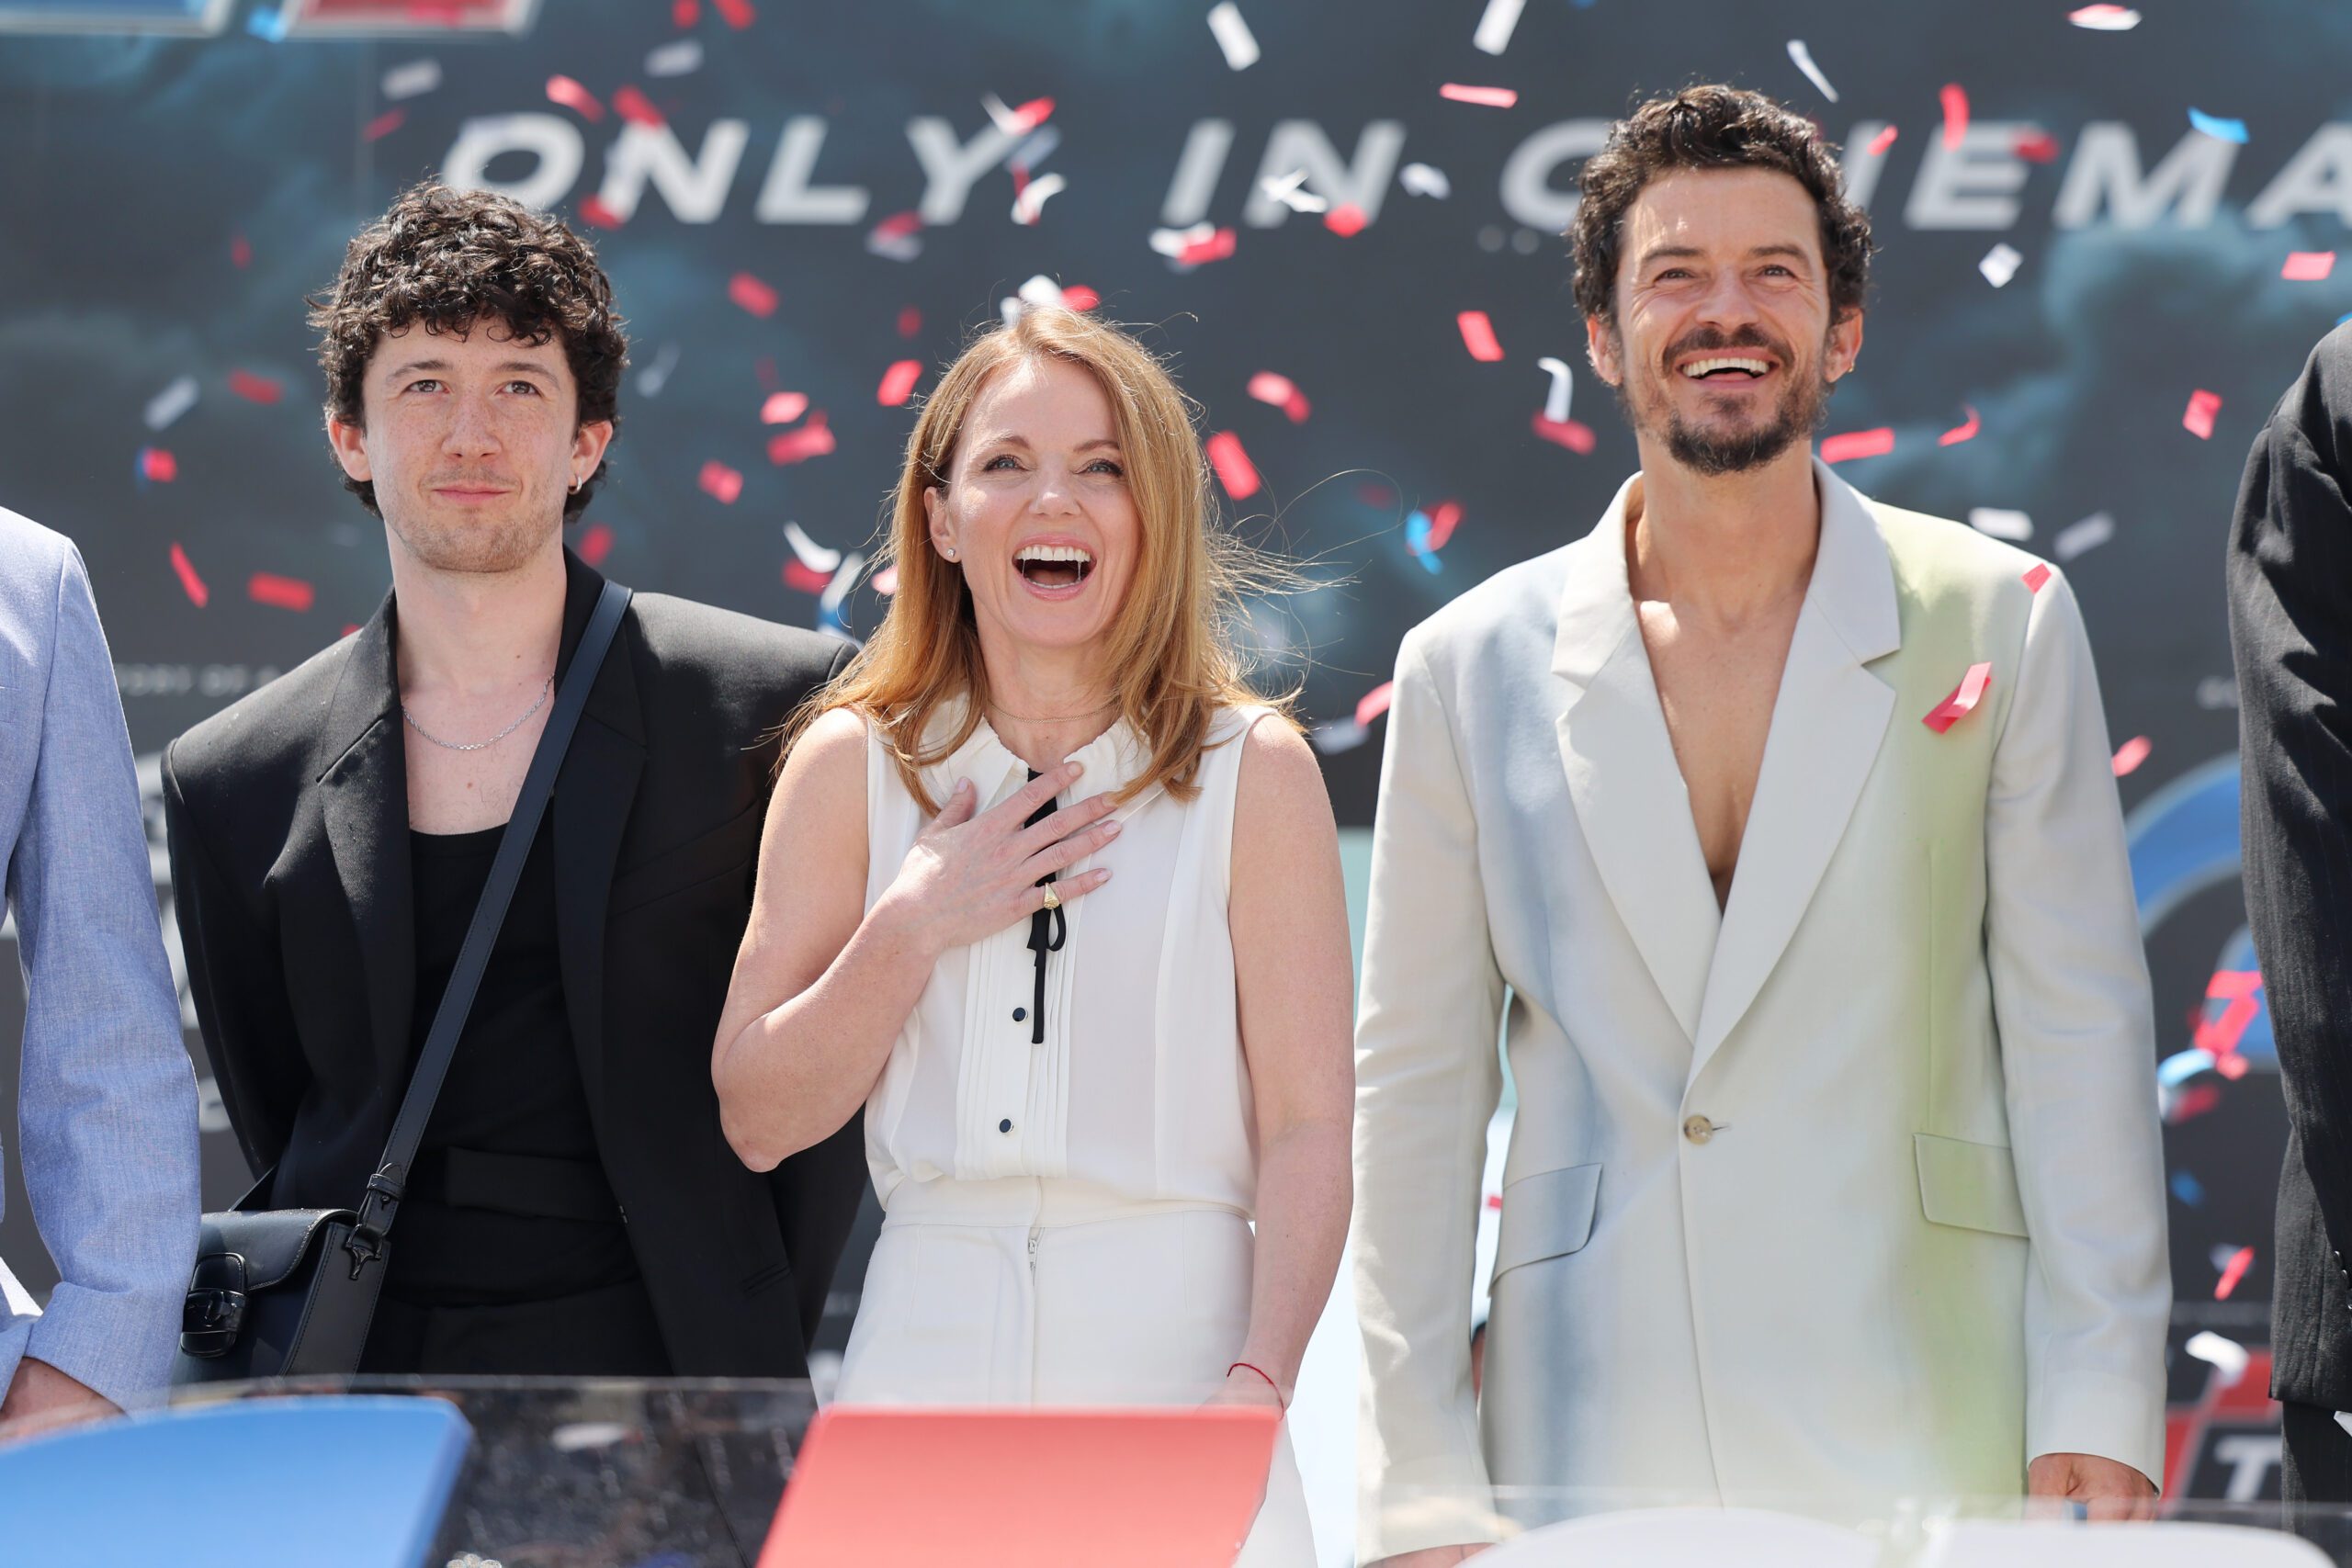 CANNES, FRANCE - MAY 26: GRAN TURISMO: THE MOVIE cast, (L-R) Maximilian Mundt, Geri Halliwell, Orlando Bloom attend the 2023 Cannes Film Festival Photo Call on May 26, 2023 in Cannes, France. (Photo by Victor Boyko/Getty Images for Sony Pictures )